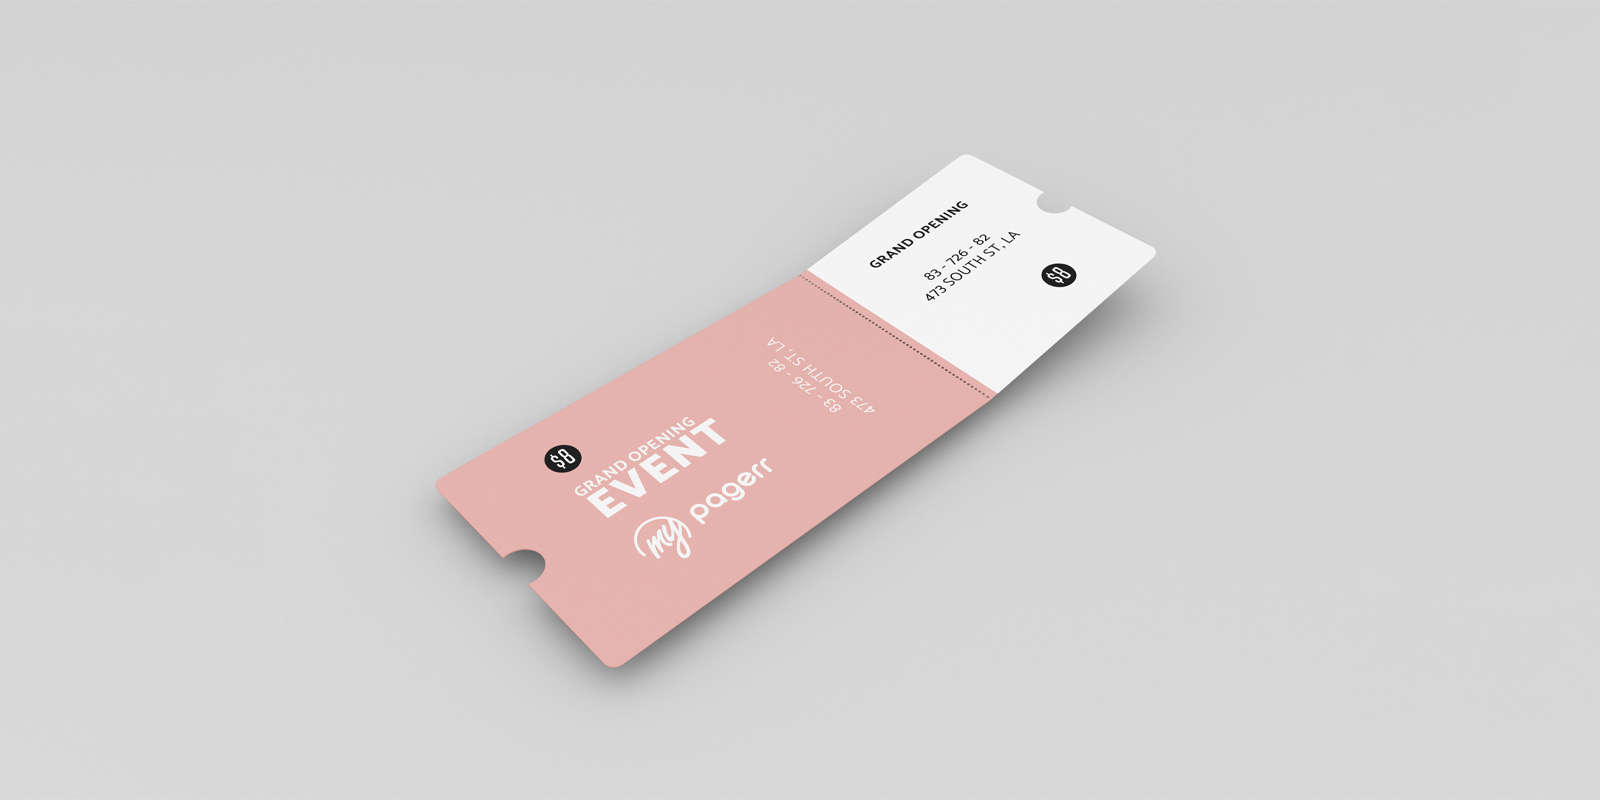 Tickets in Paris - Print with Pagerr